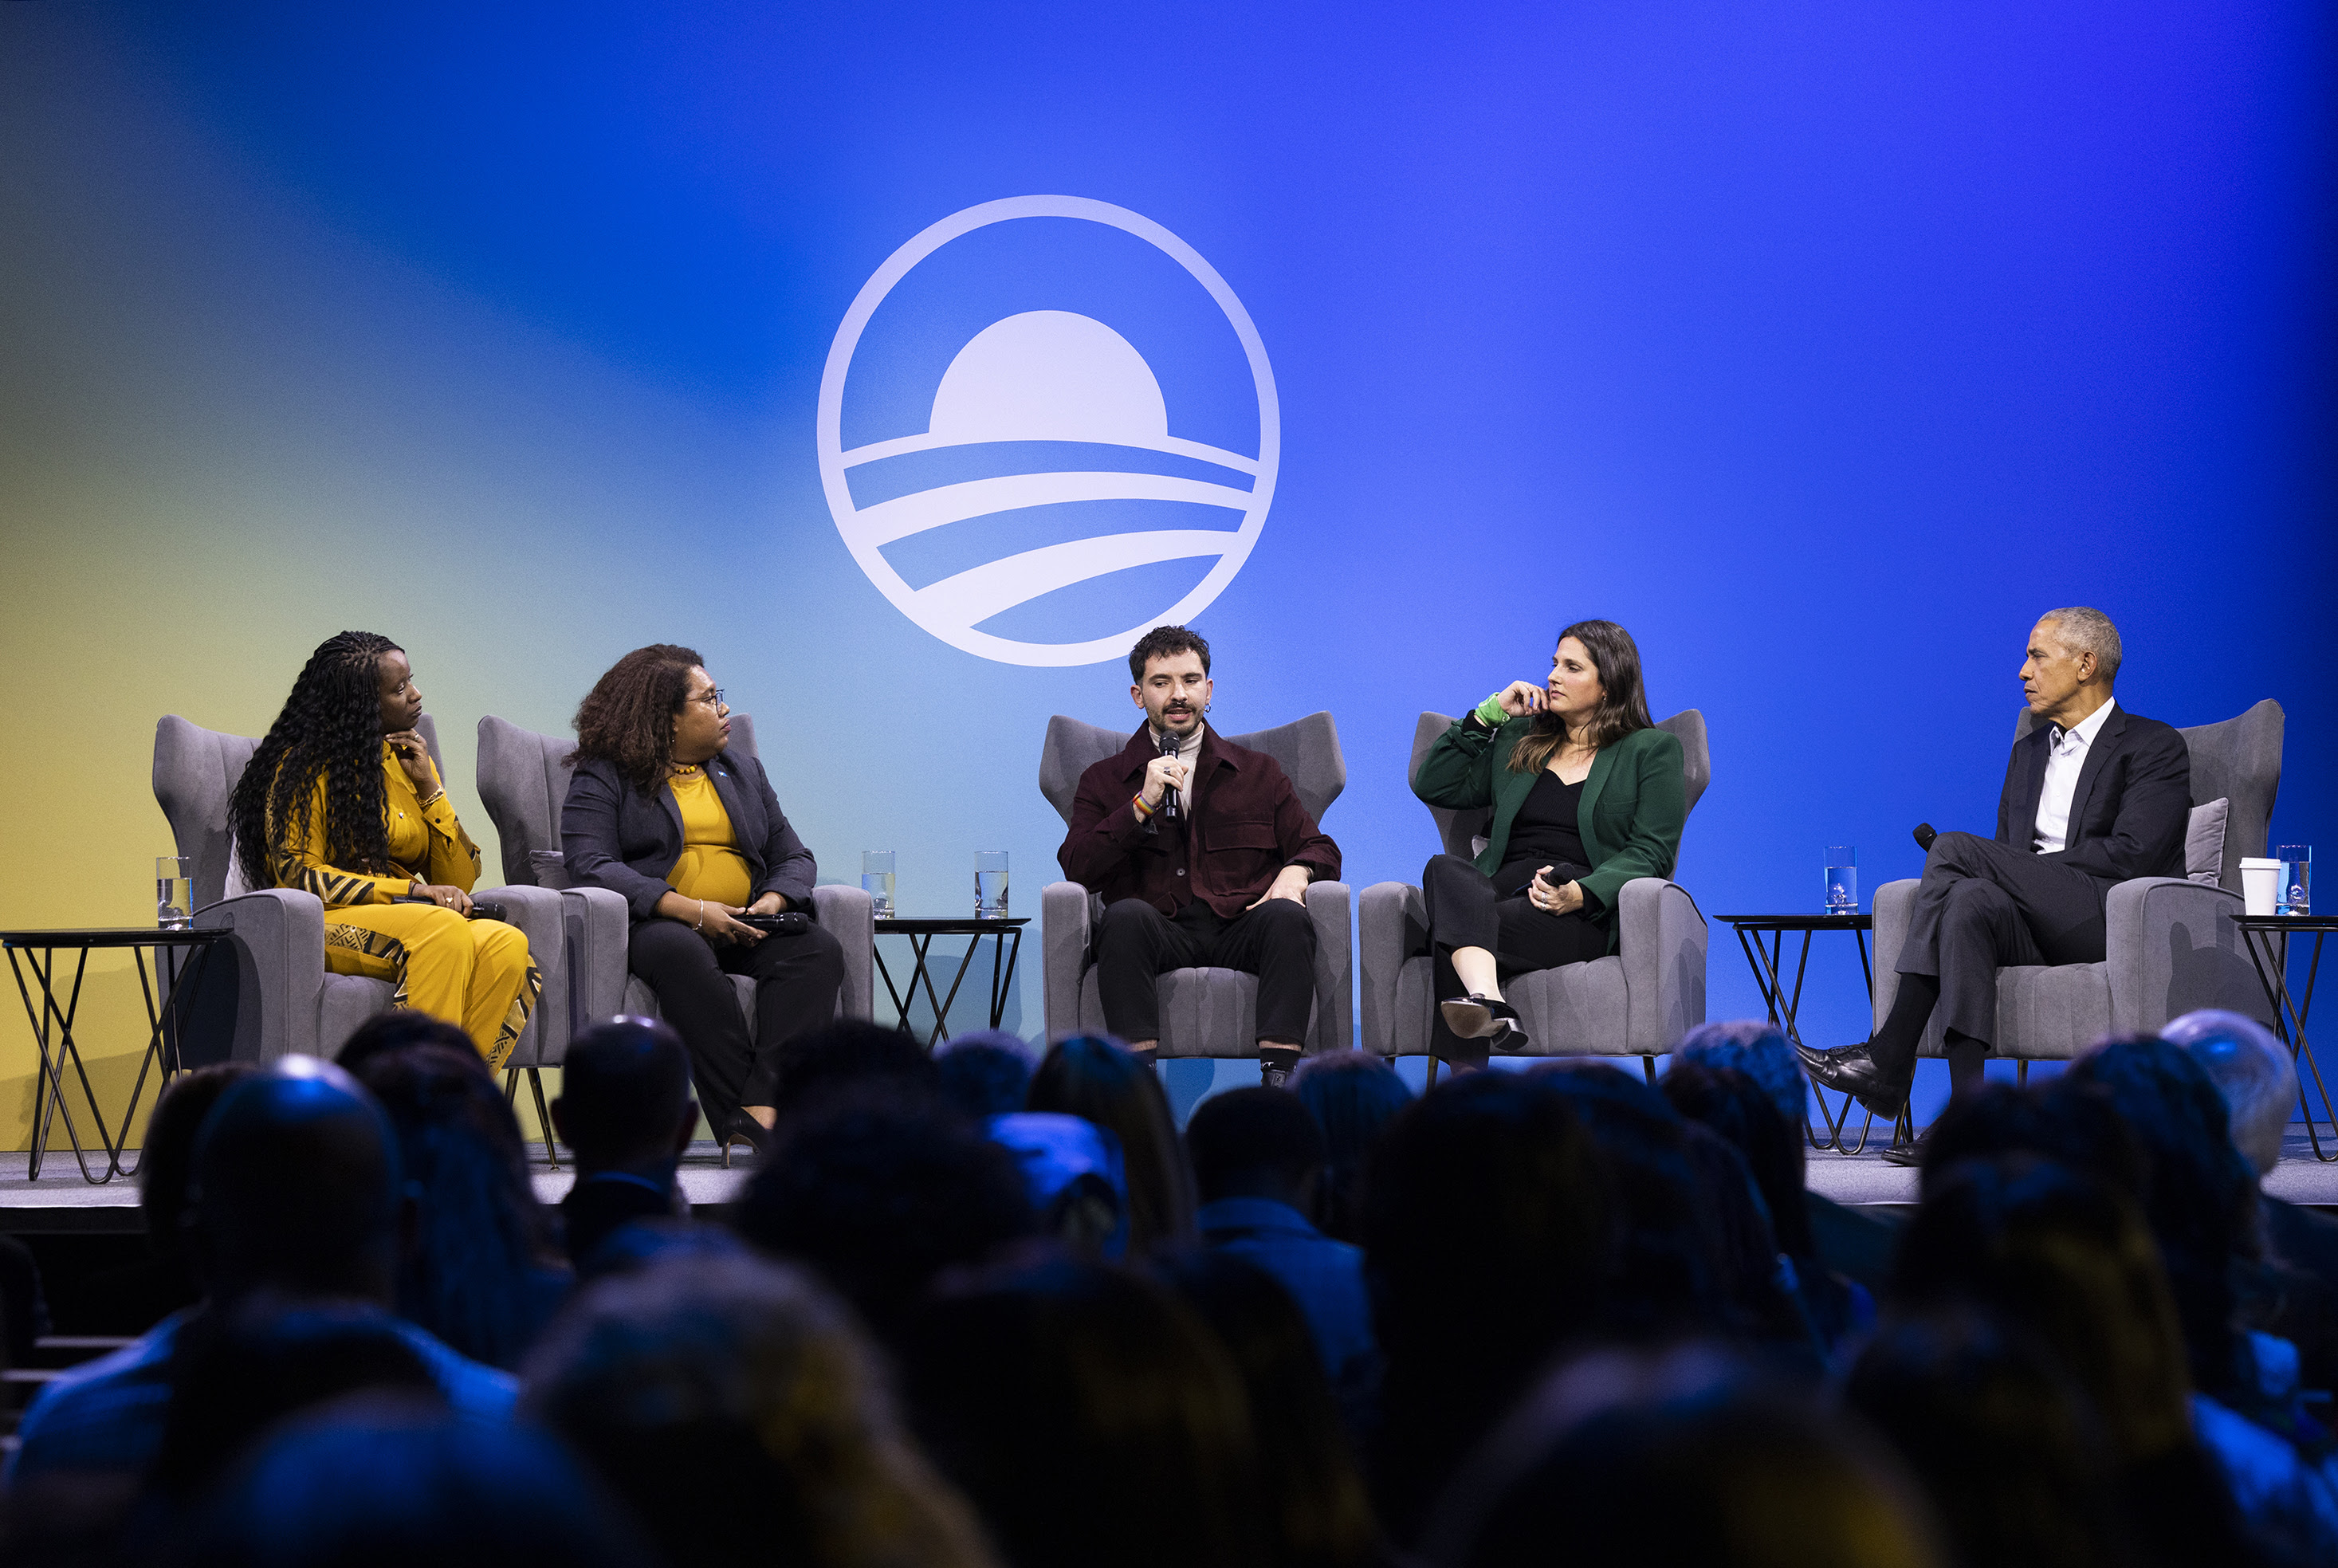 Nick Antipov sits on stage and speaks into a microphone on a panel alongside Doussouba Konaté, Landisang Kotaro, Natalia Herbst, and President Obama. All the speakers are a range of light and deep skin tones. In the background is the Obama Foundation logo, an abstract rising sun in the shape of the letter O. 